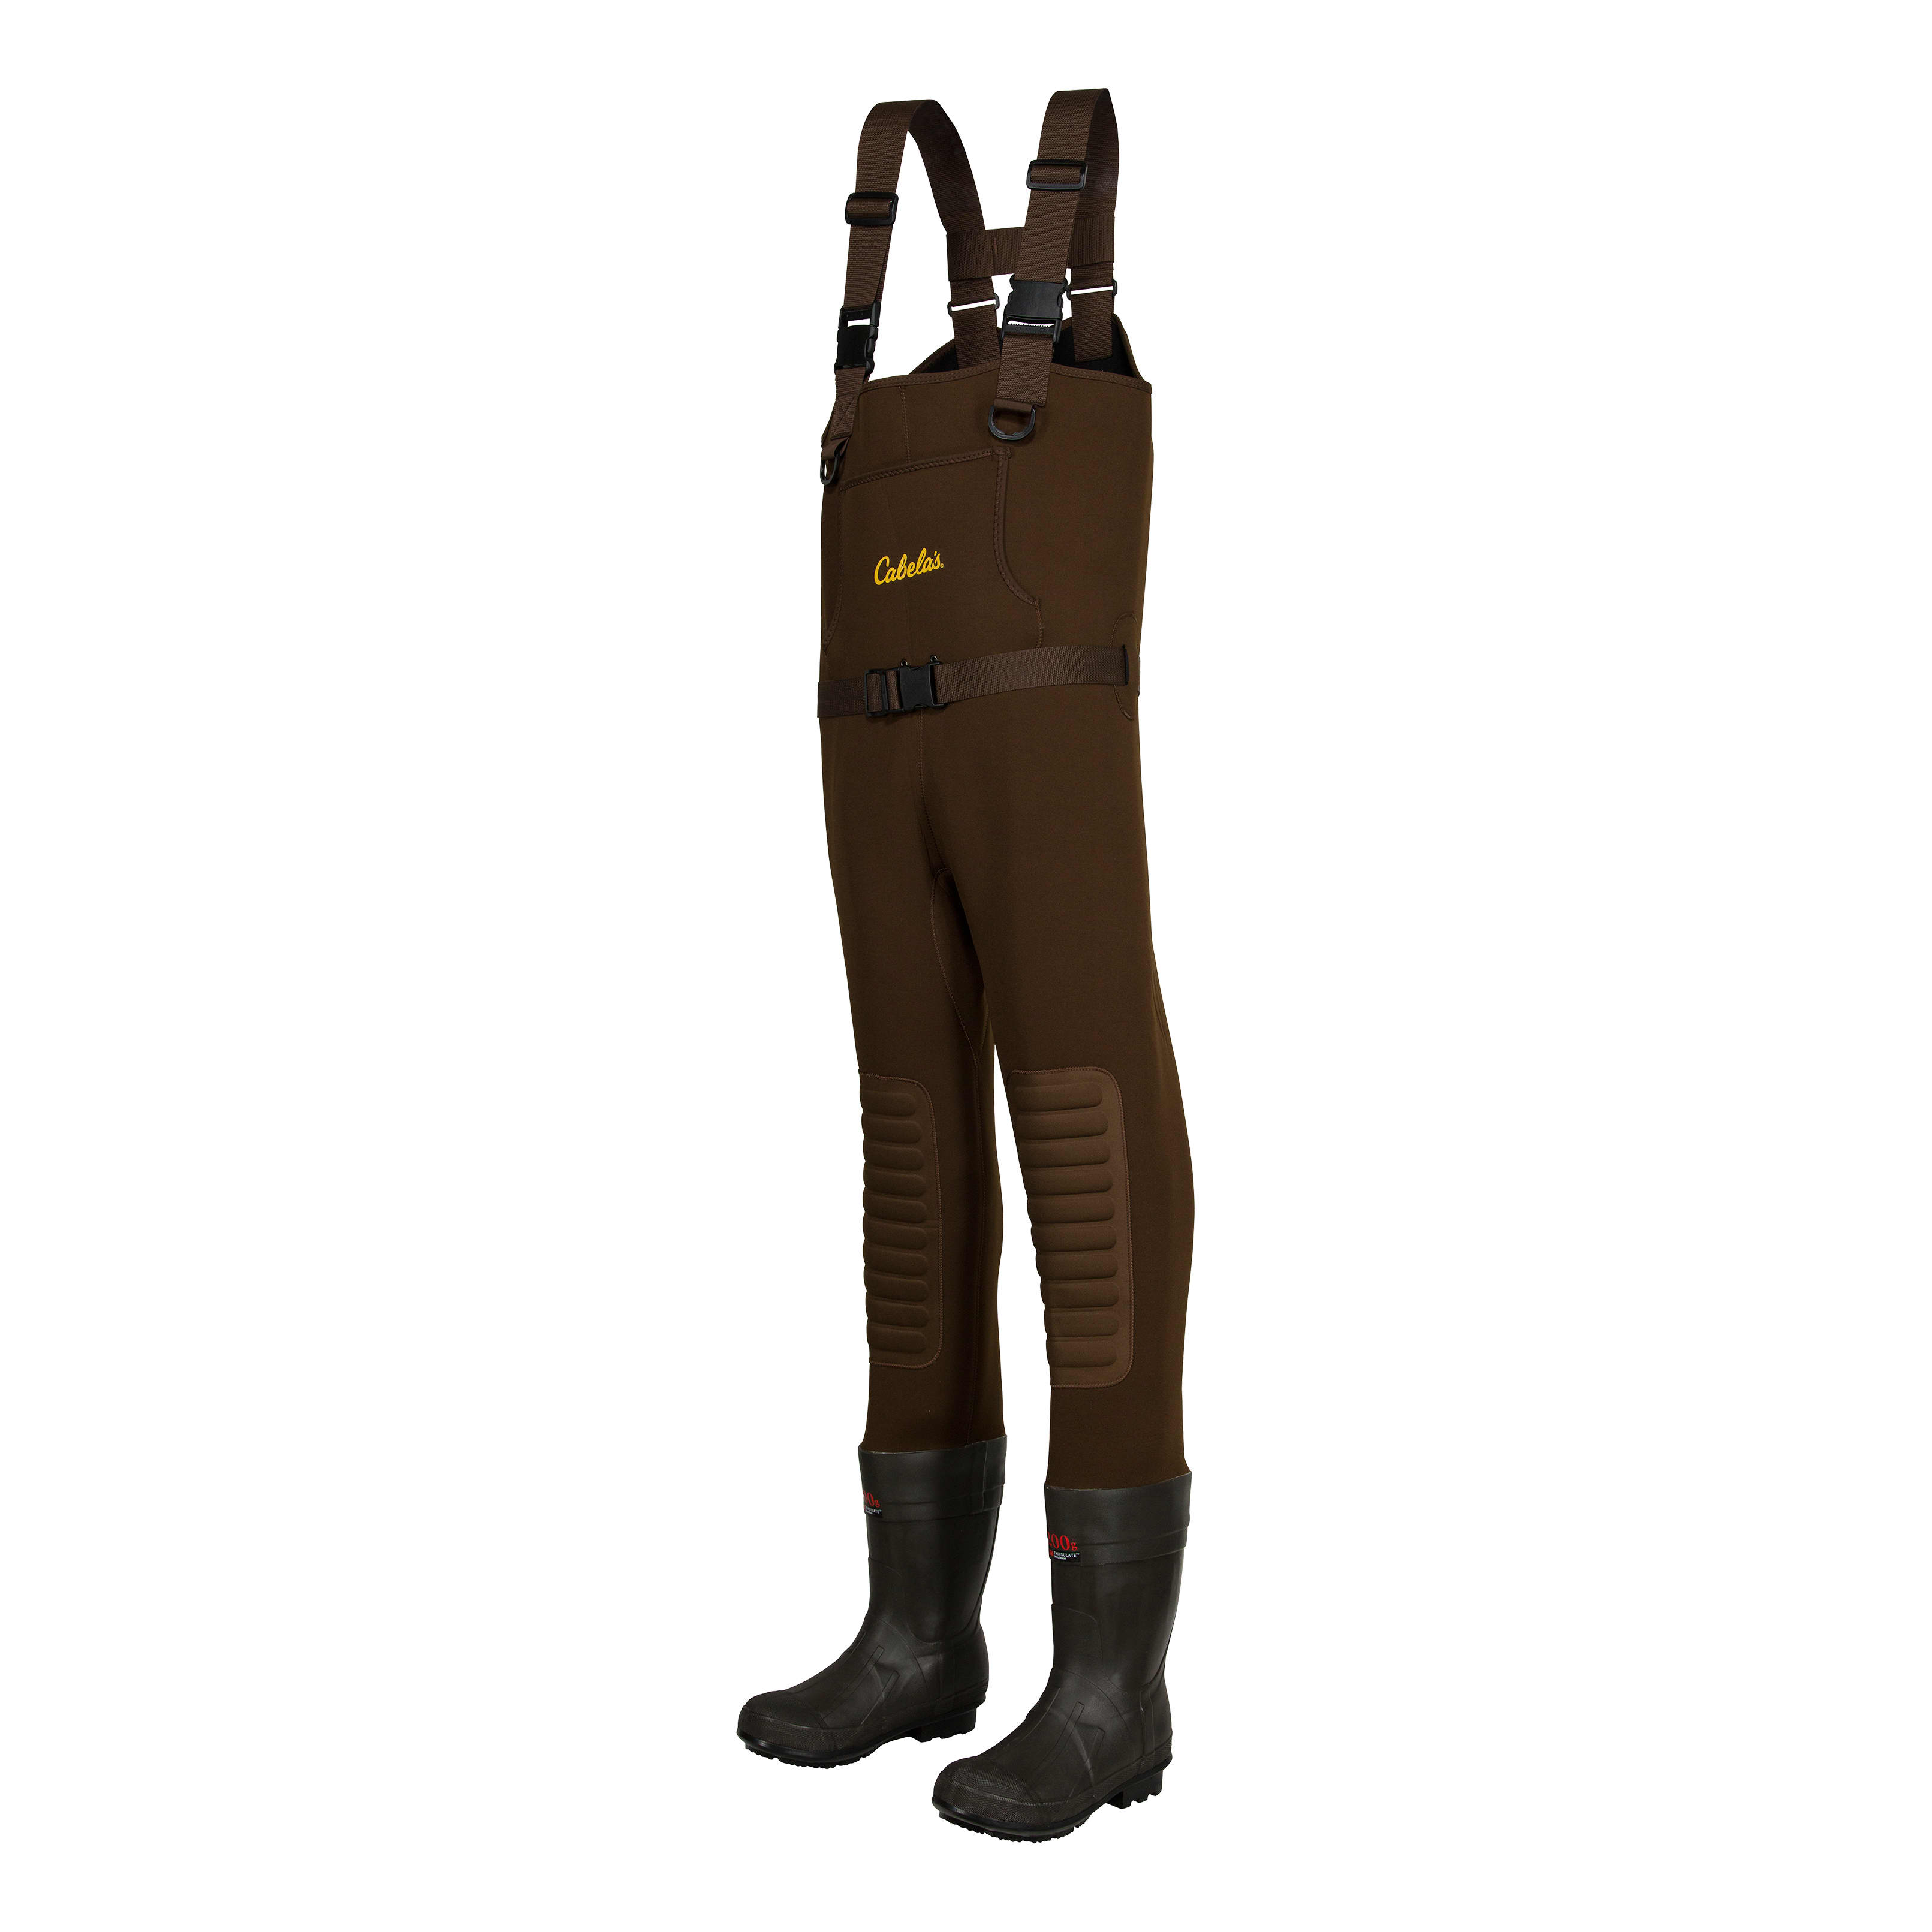 MOUNTALK High Chest Waders for Men with Boots, Vietnam